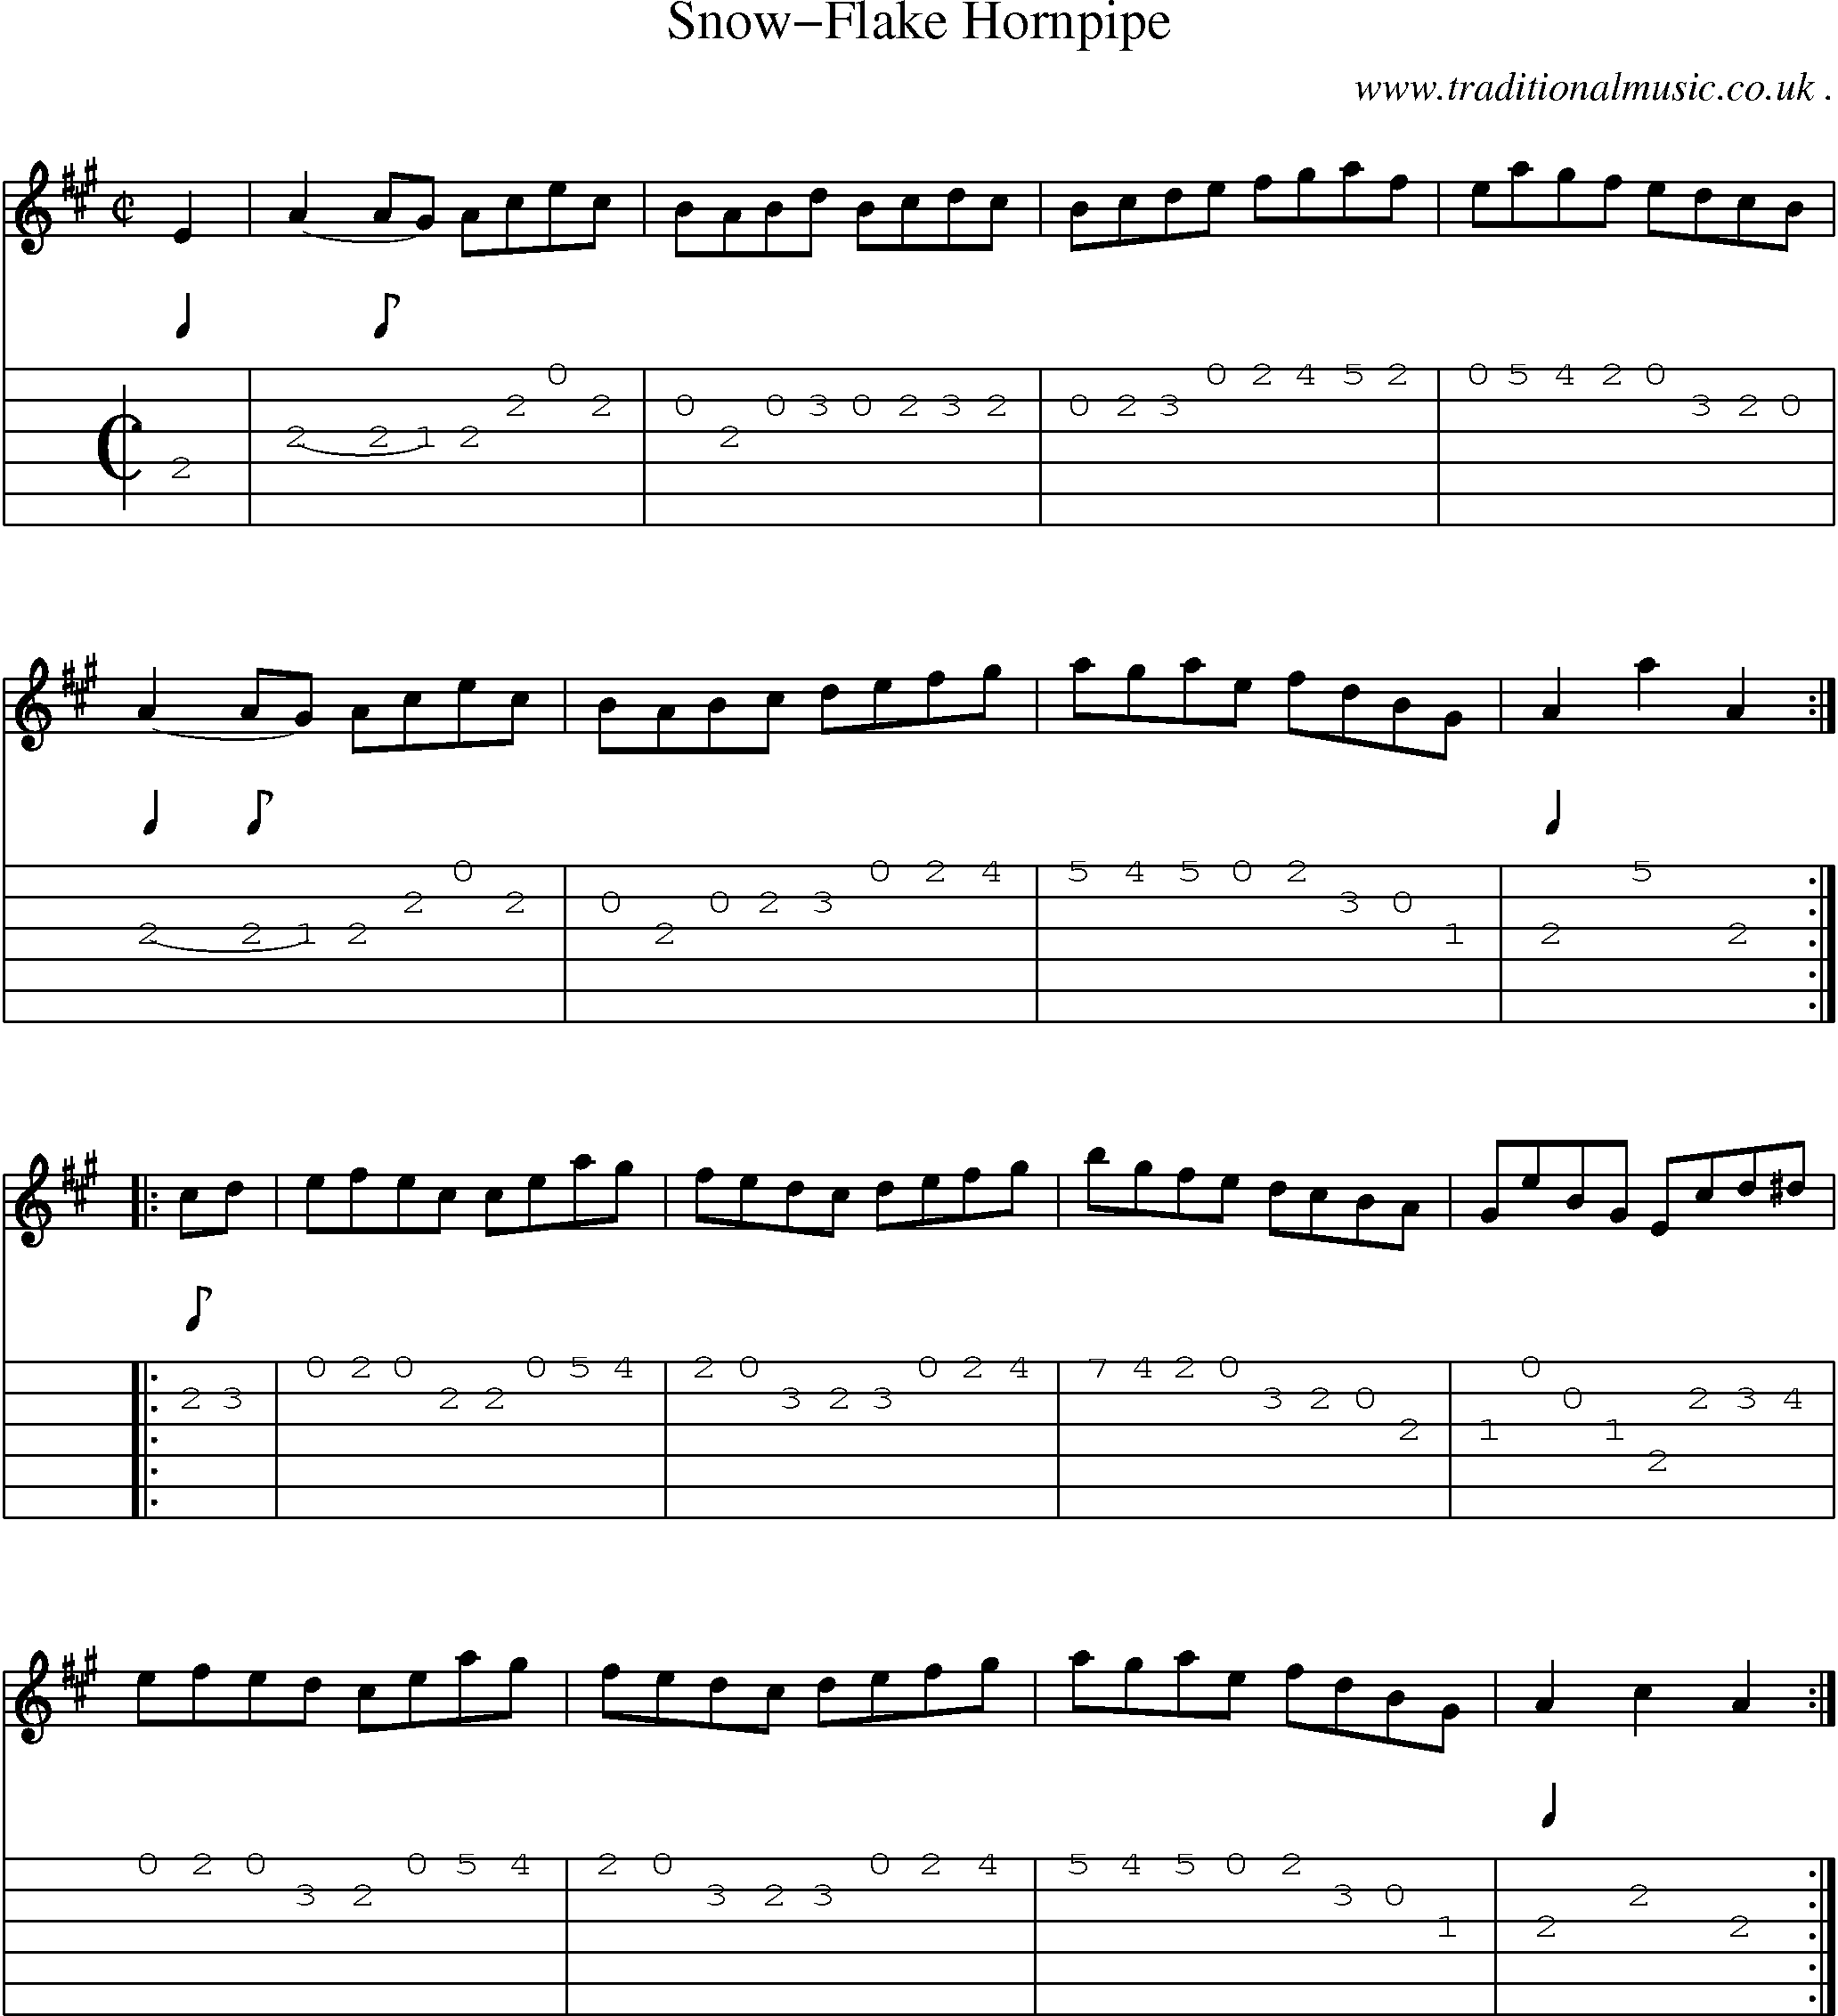 Sheet-Music and Guitar Tabs for Snow-flake Hornpipe